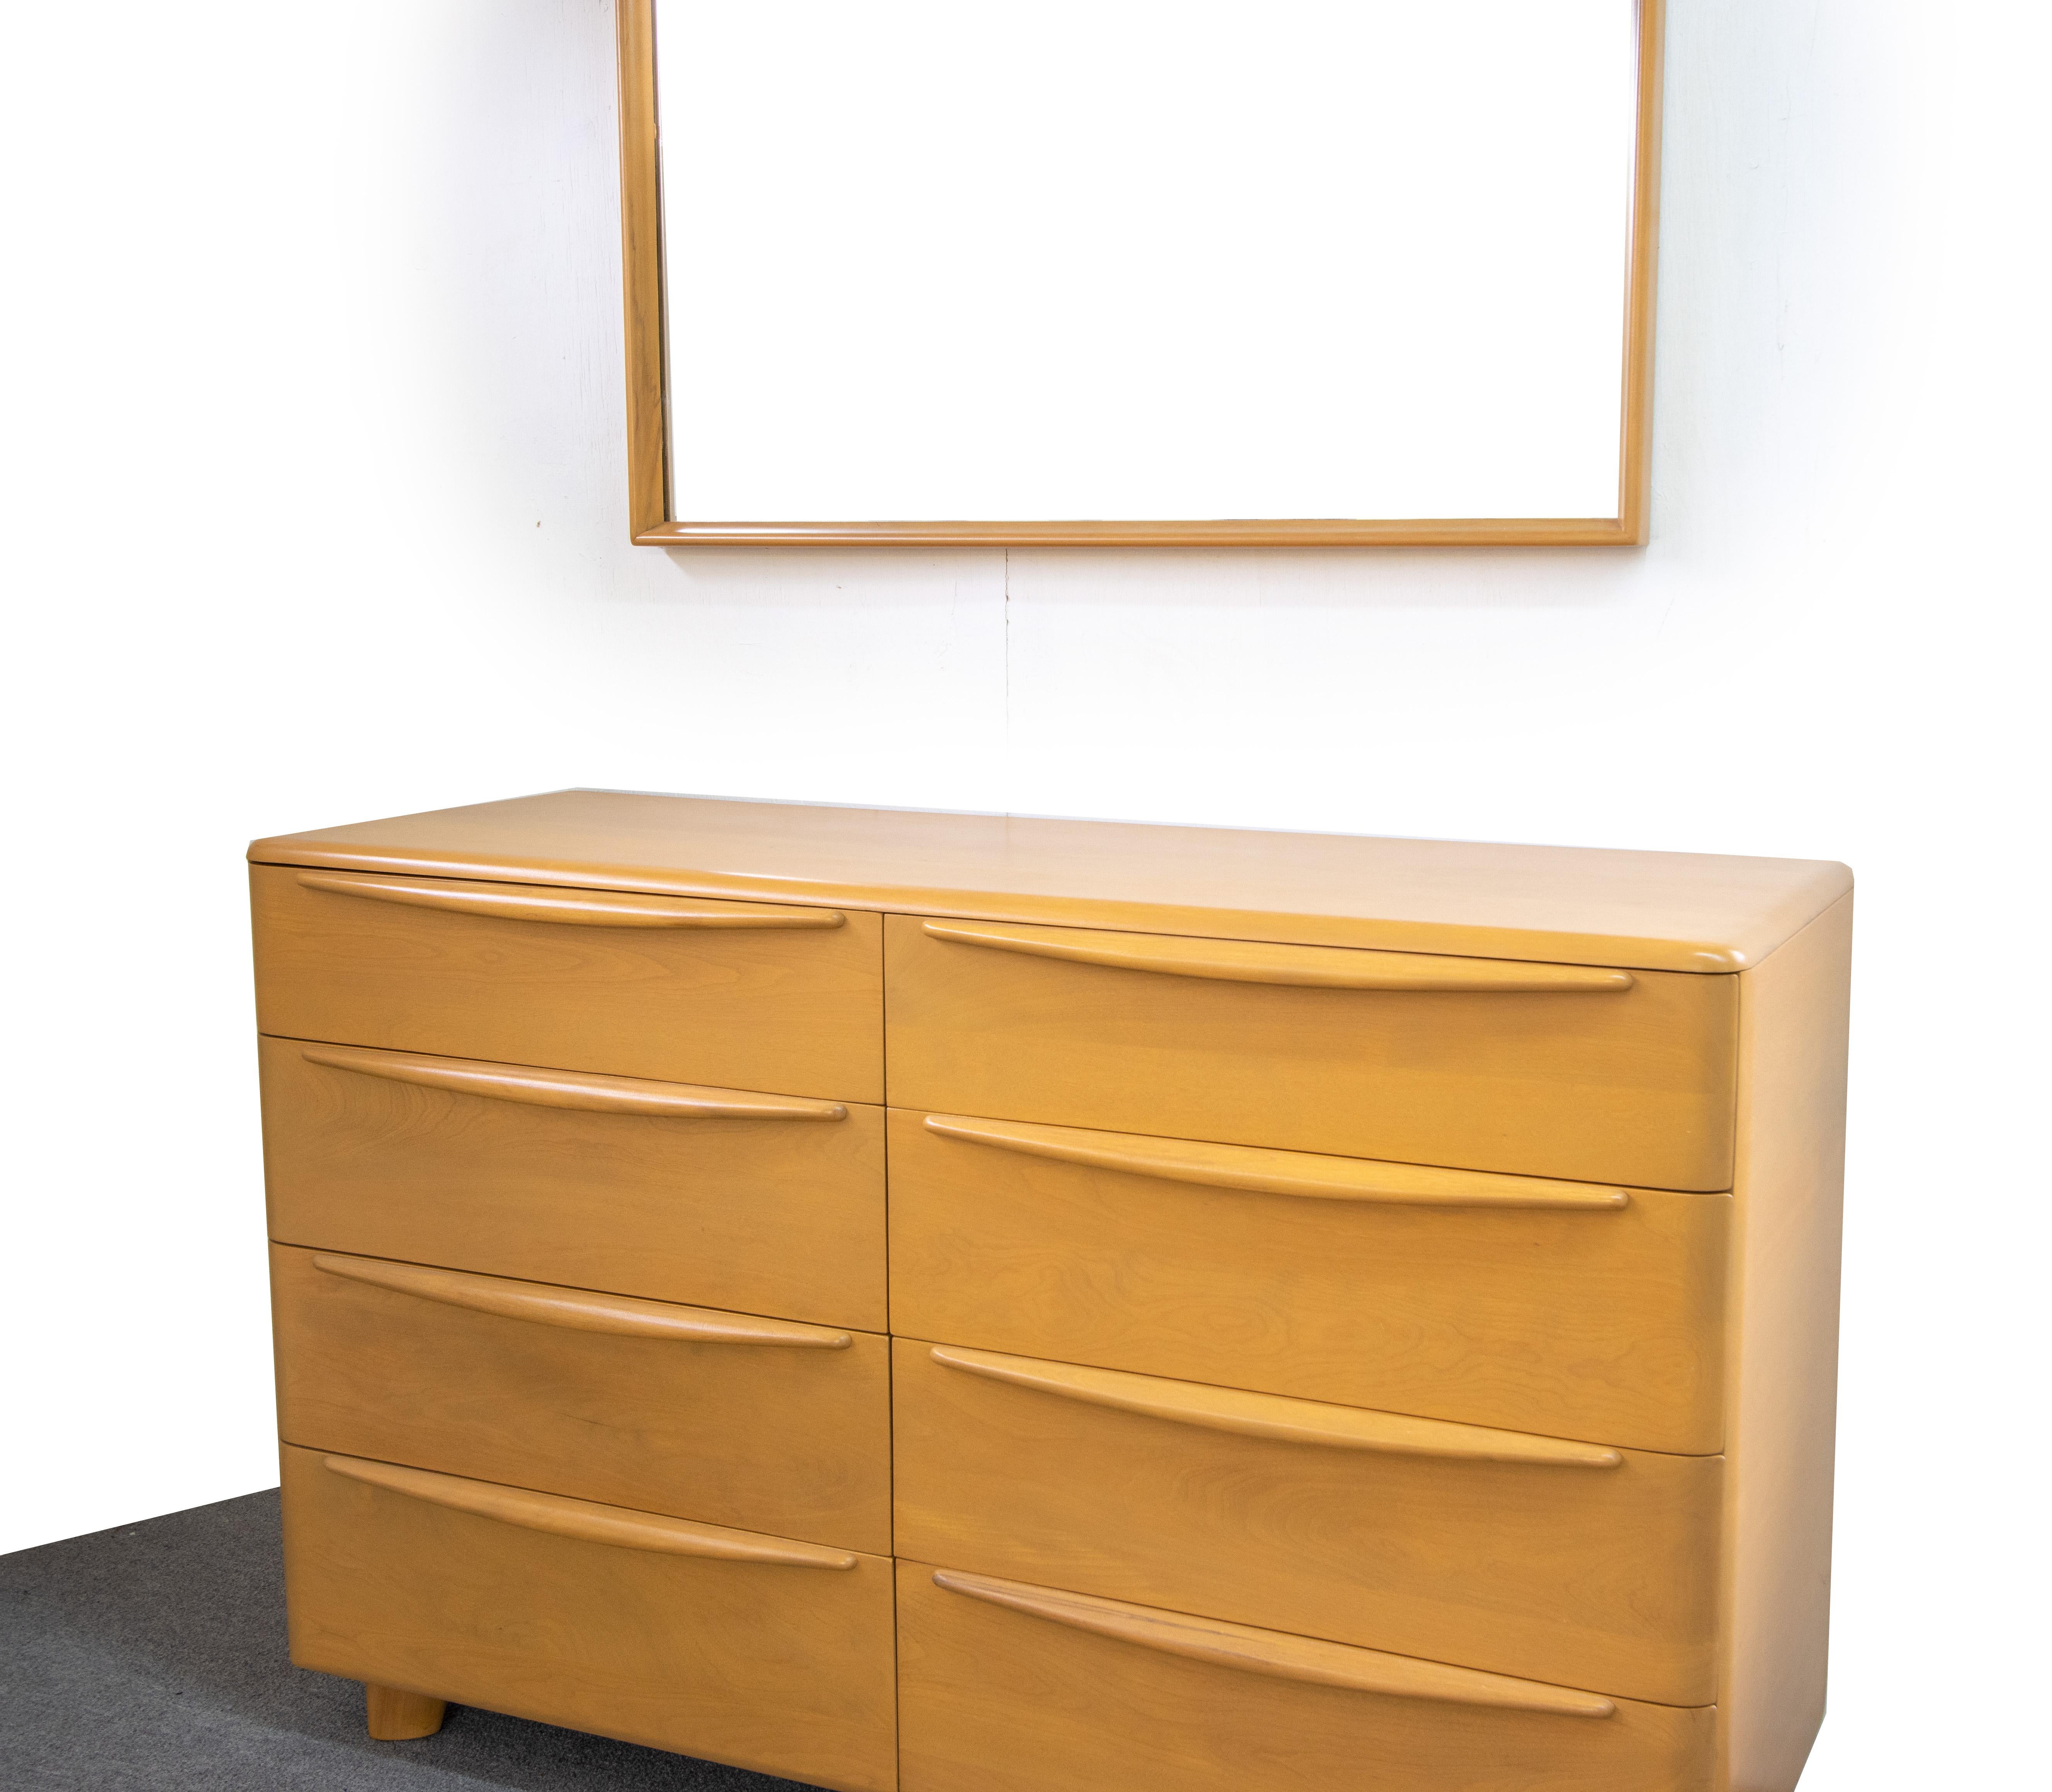 An exceptional 1950s, Heywood Wakefield Encore 8 drawer low dresser in a beautiful wheat color.  Matching mirror included.  Great rounded edges with elongated drawer pulls that span the width of the drawers. This piece was stripped and